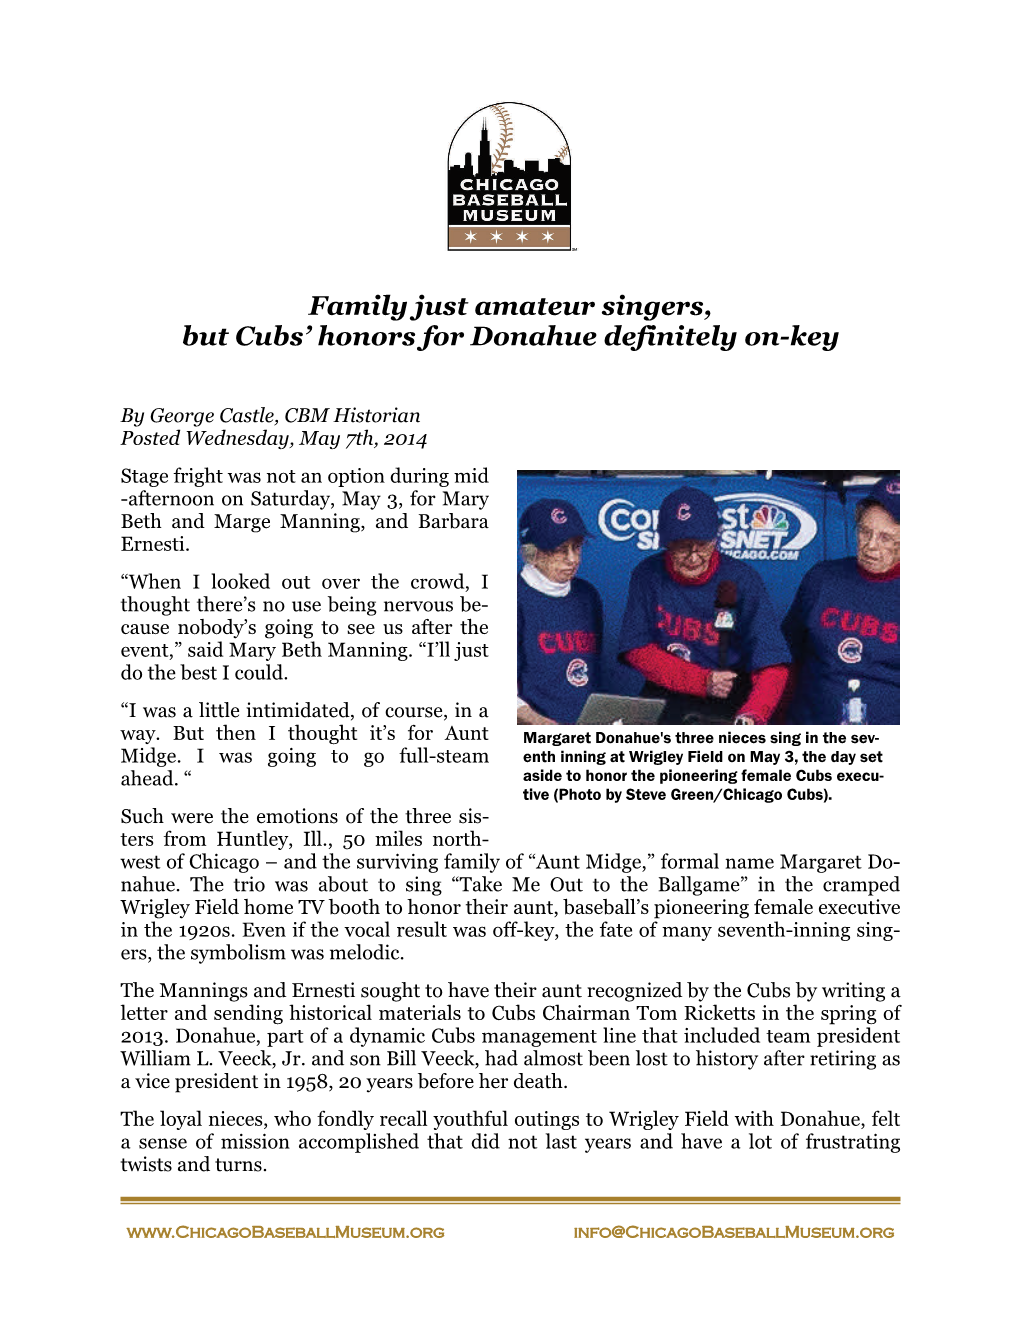 Family Just Amateur Singers, but Cubs' Honors for Donahue Definitely On-Key